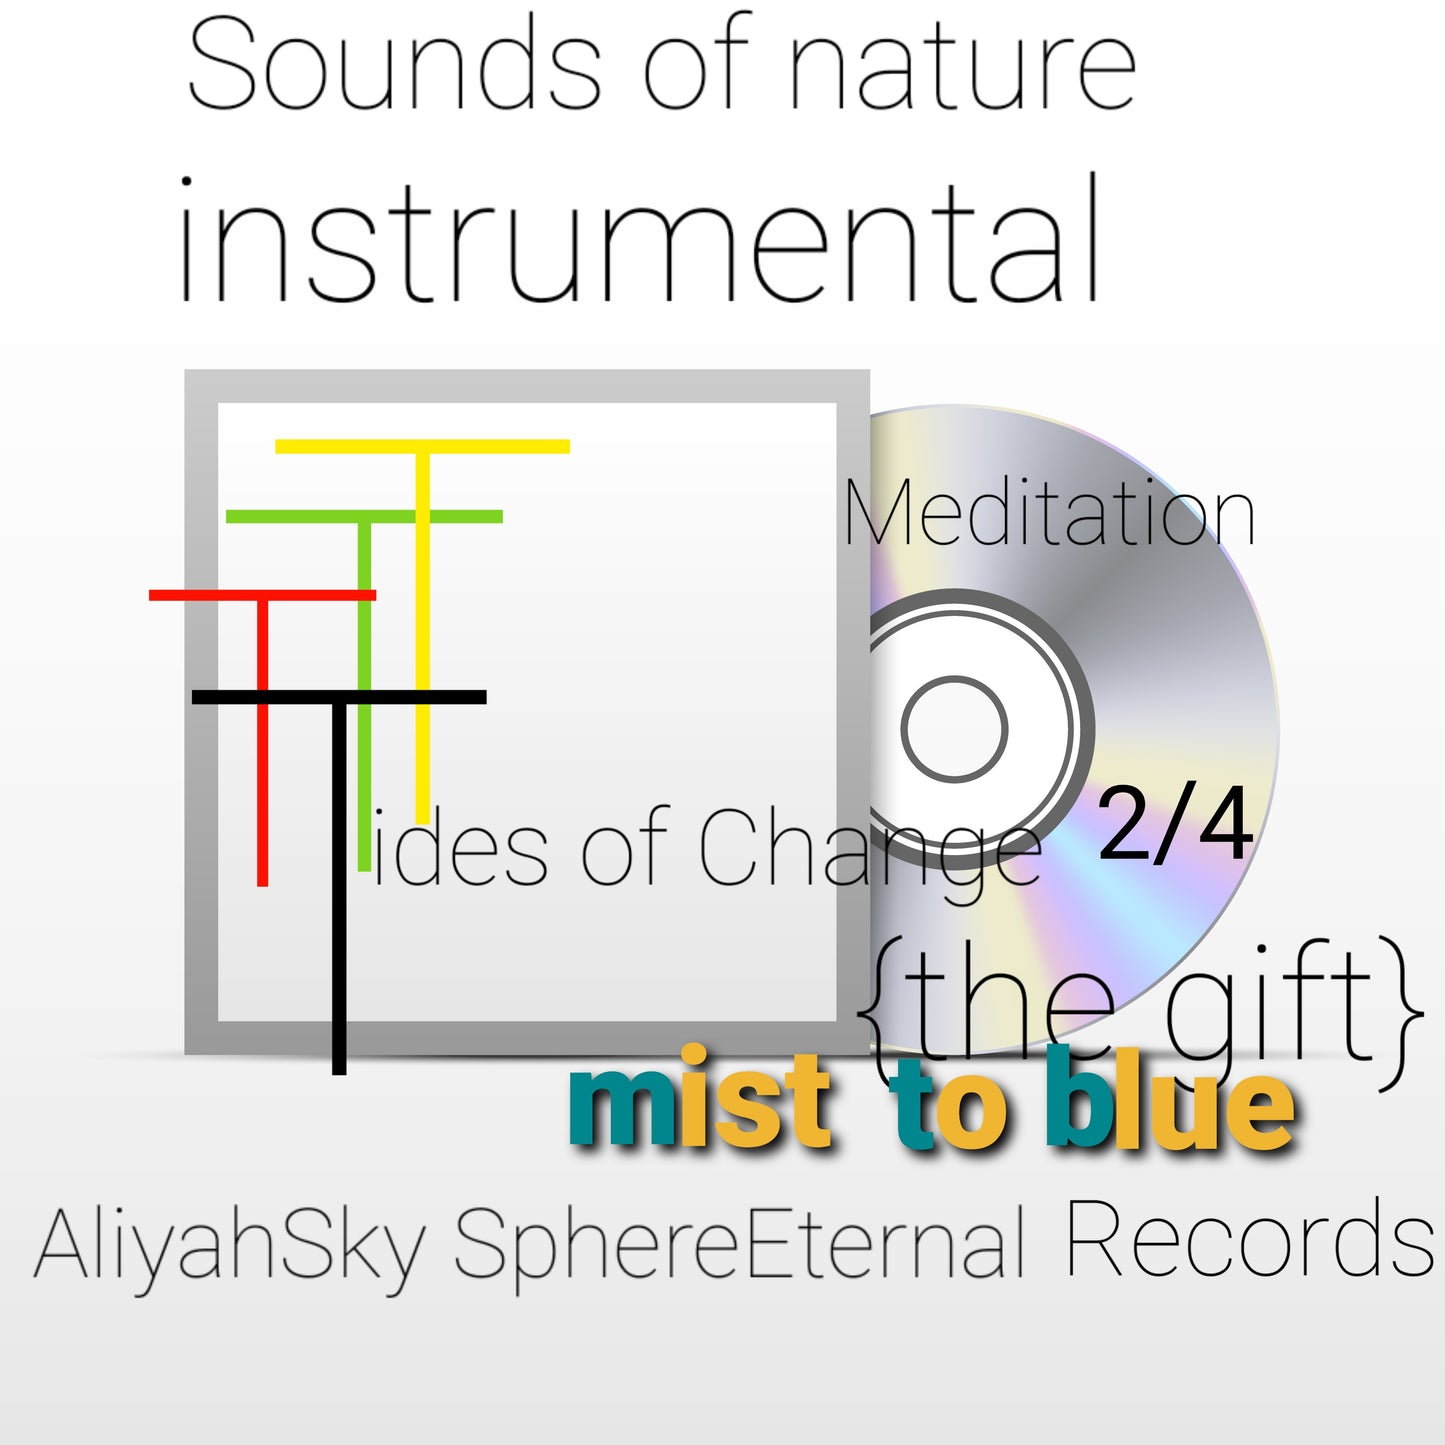 Sounds Of Nature Instrumental Tides Of Change{the gift}2/4 Mist to blue